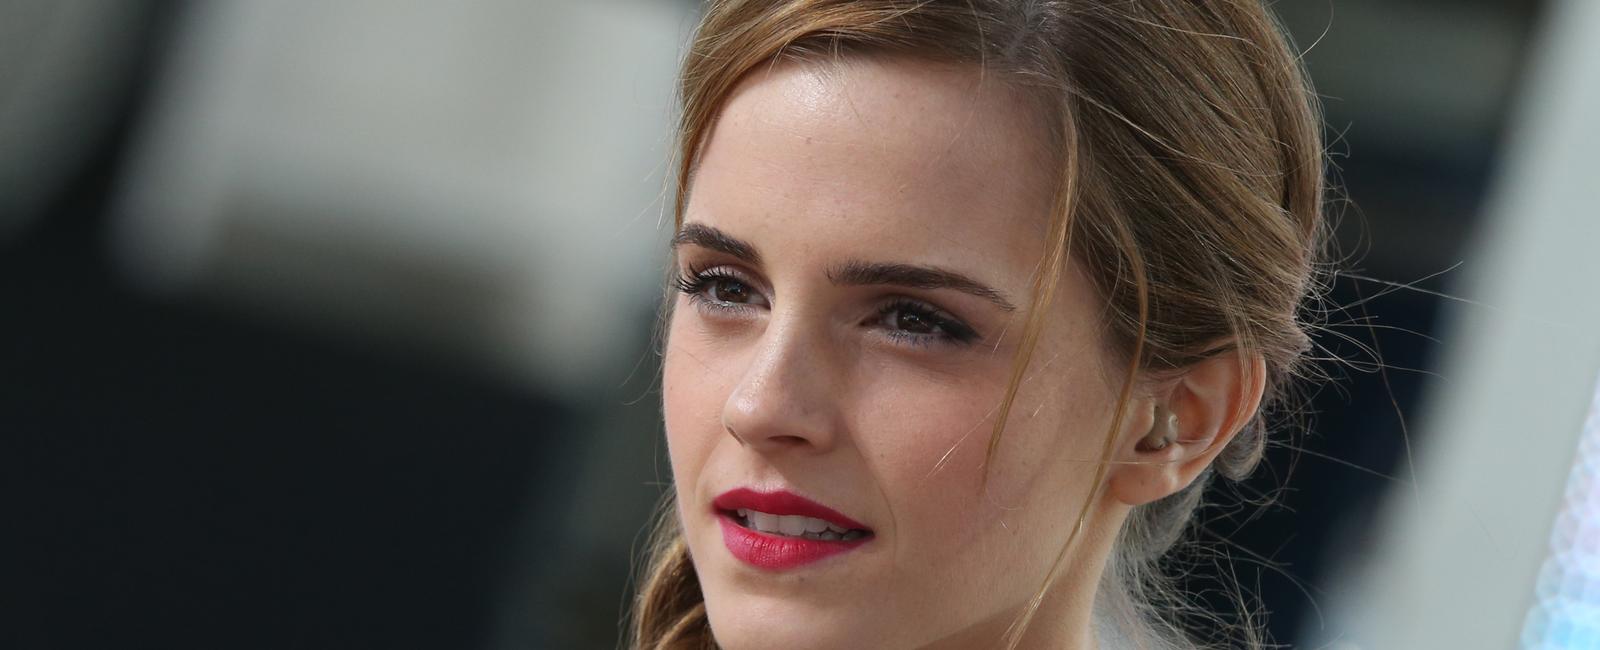 British star emma watson was actually born in france